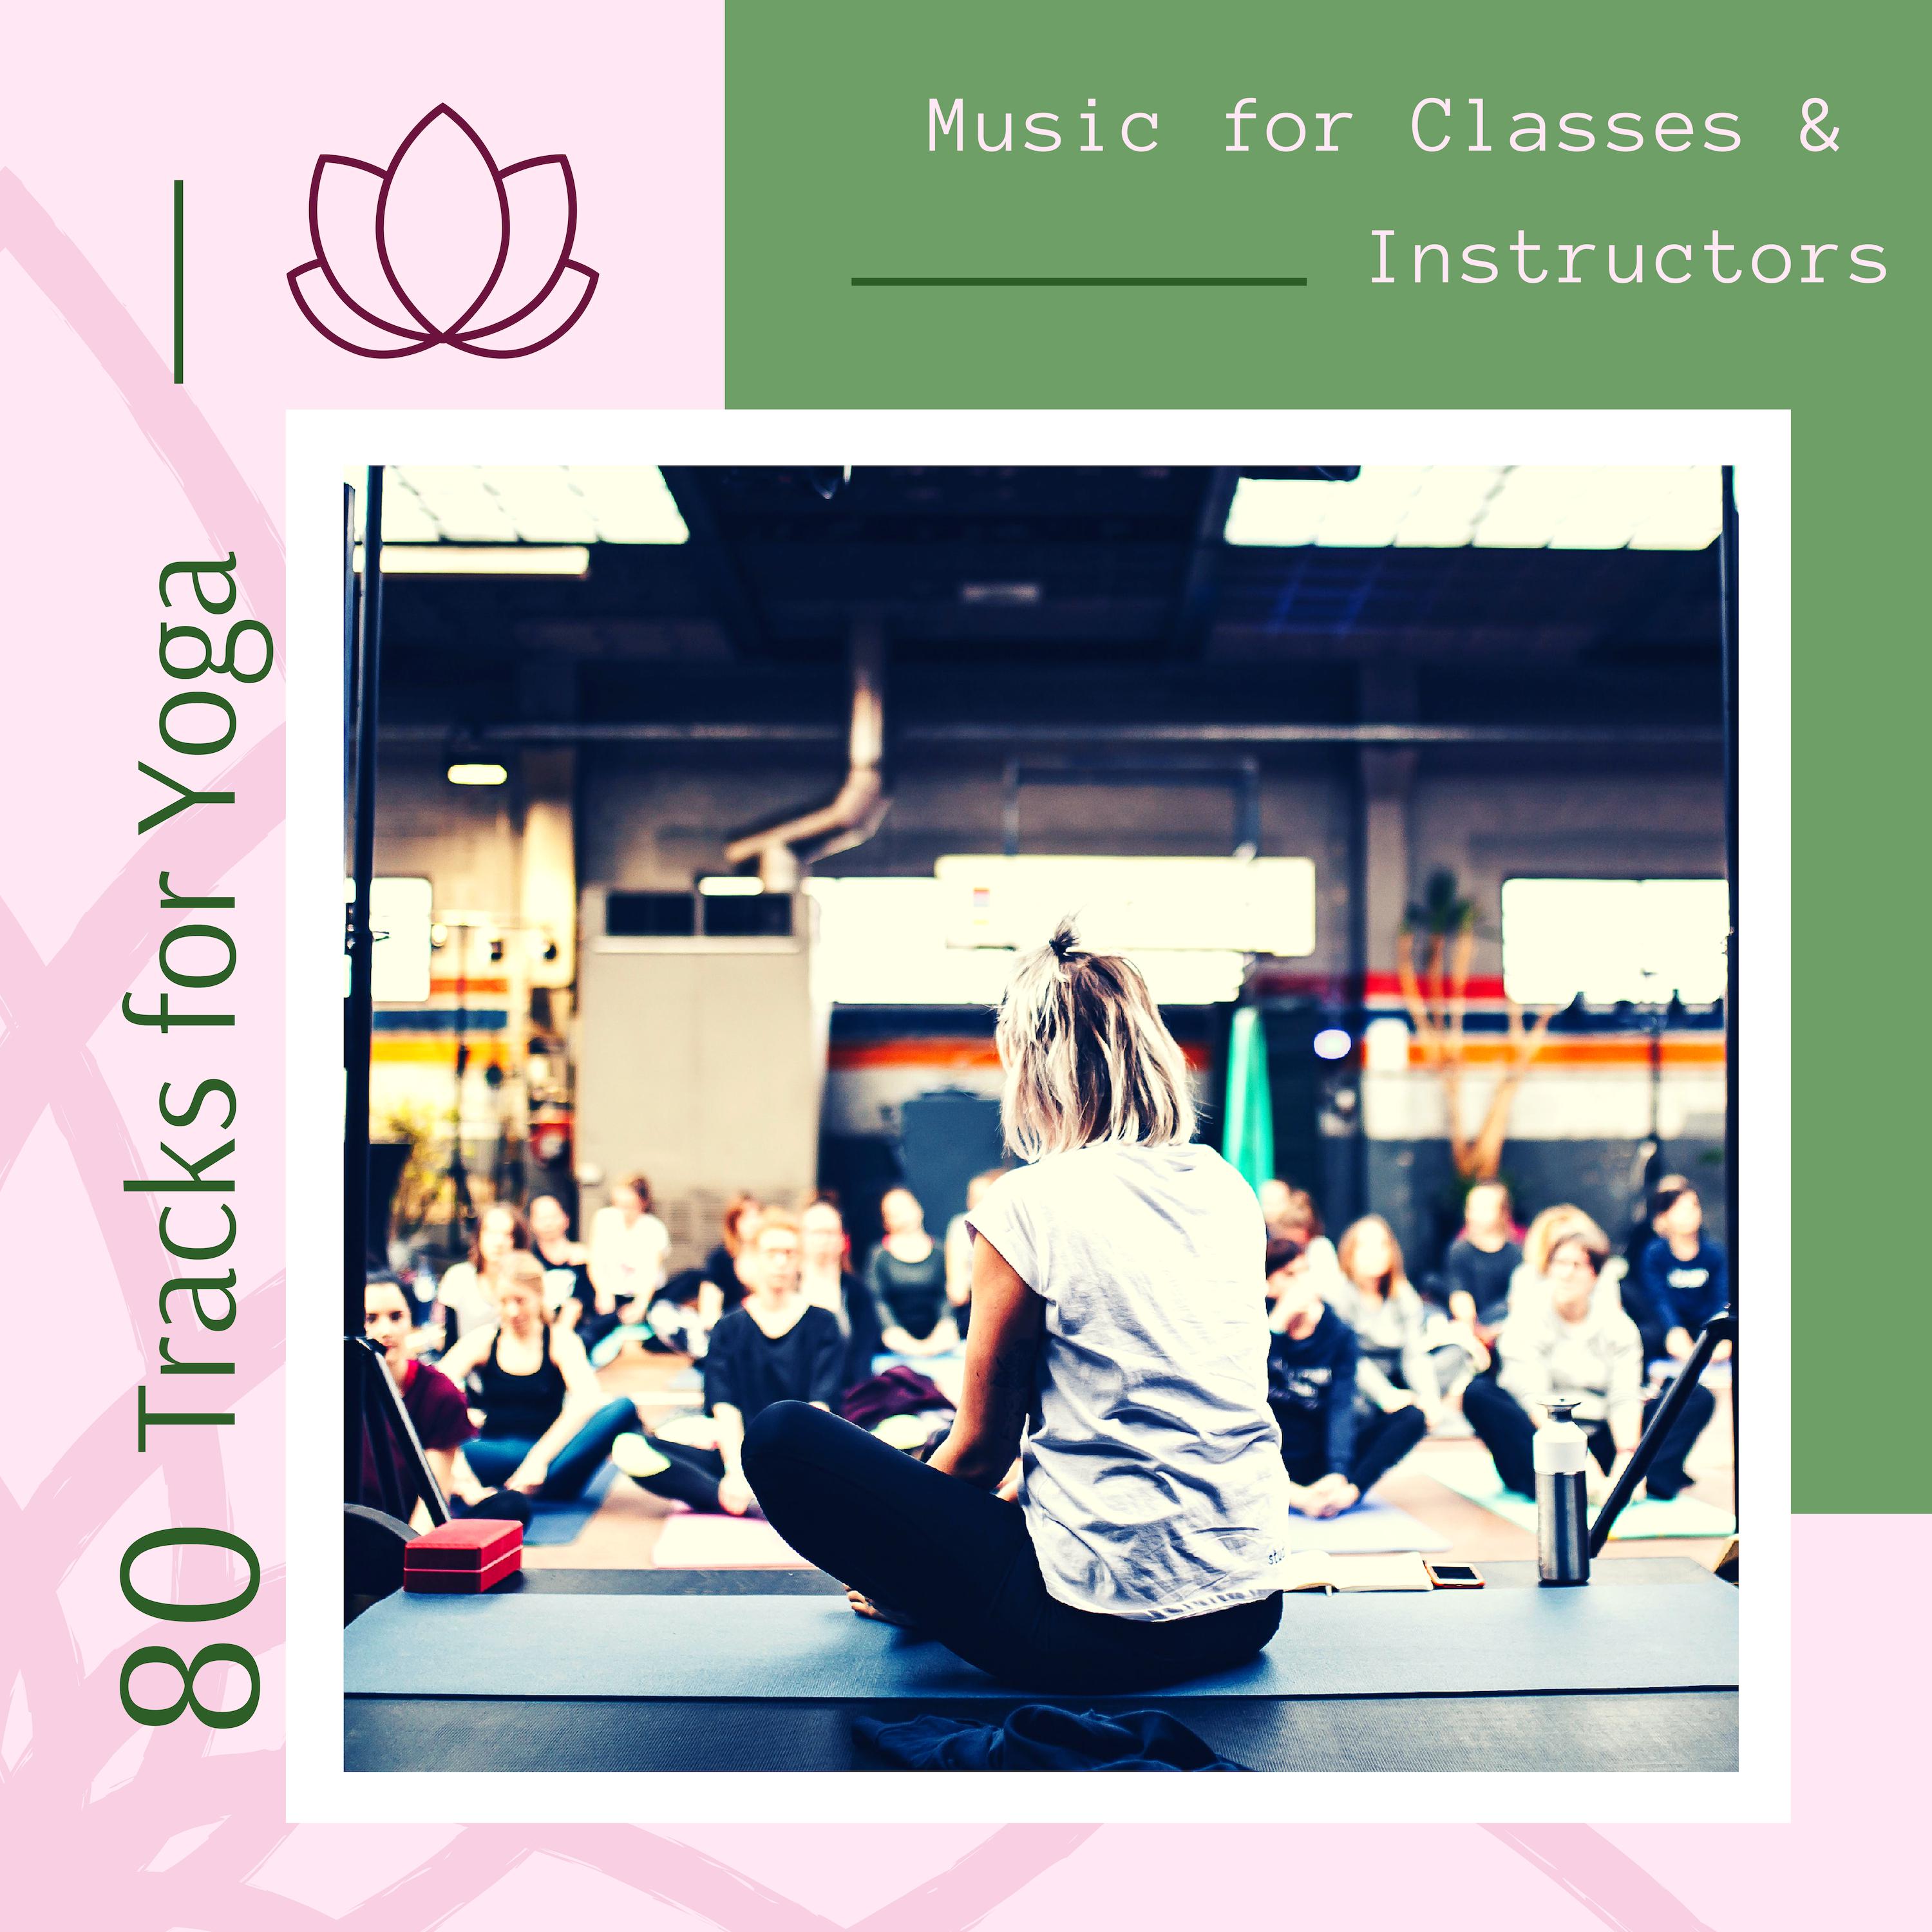 Music for Classes & Instructors